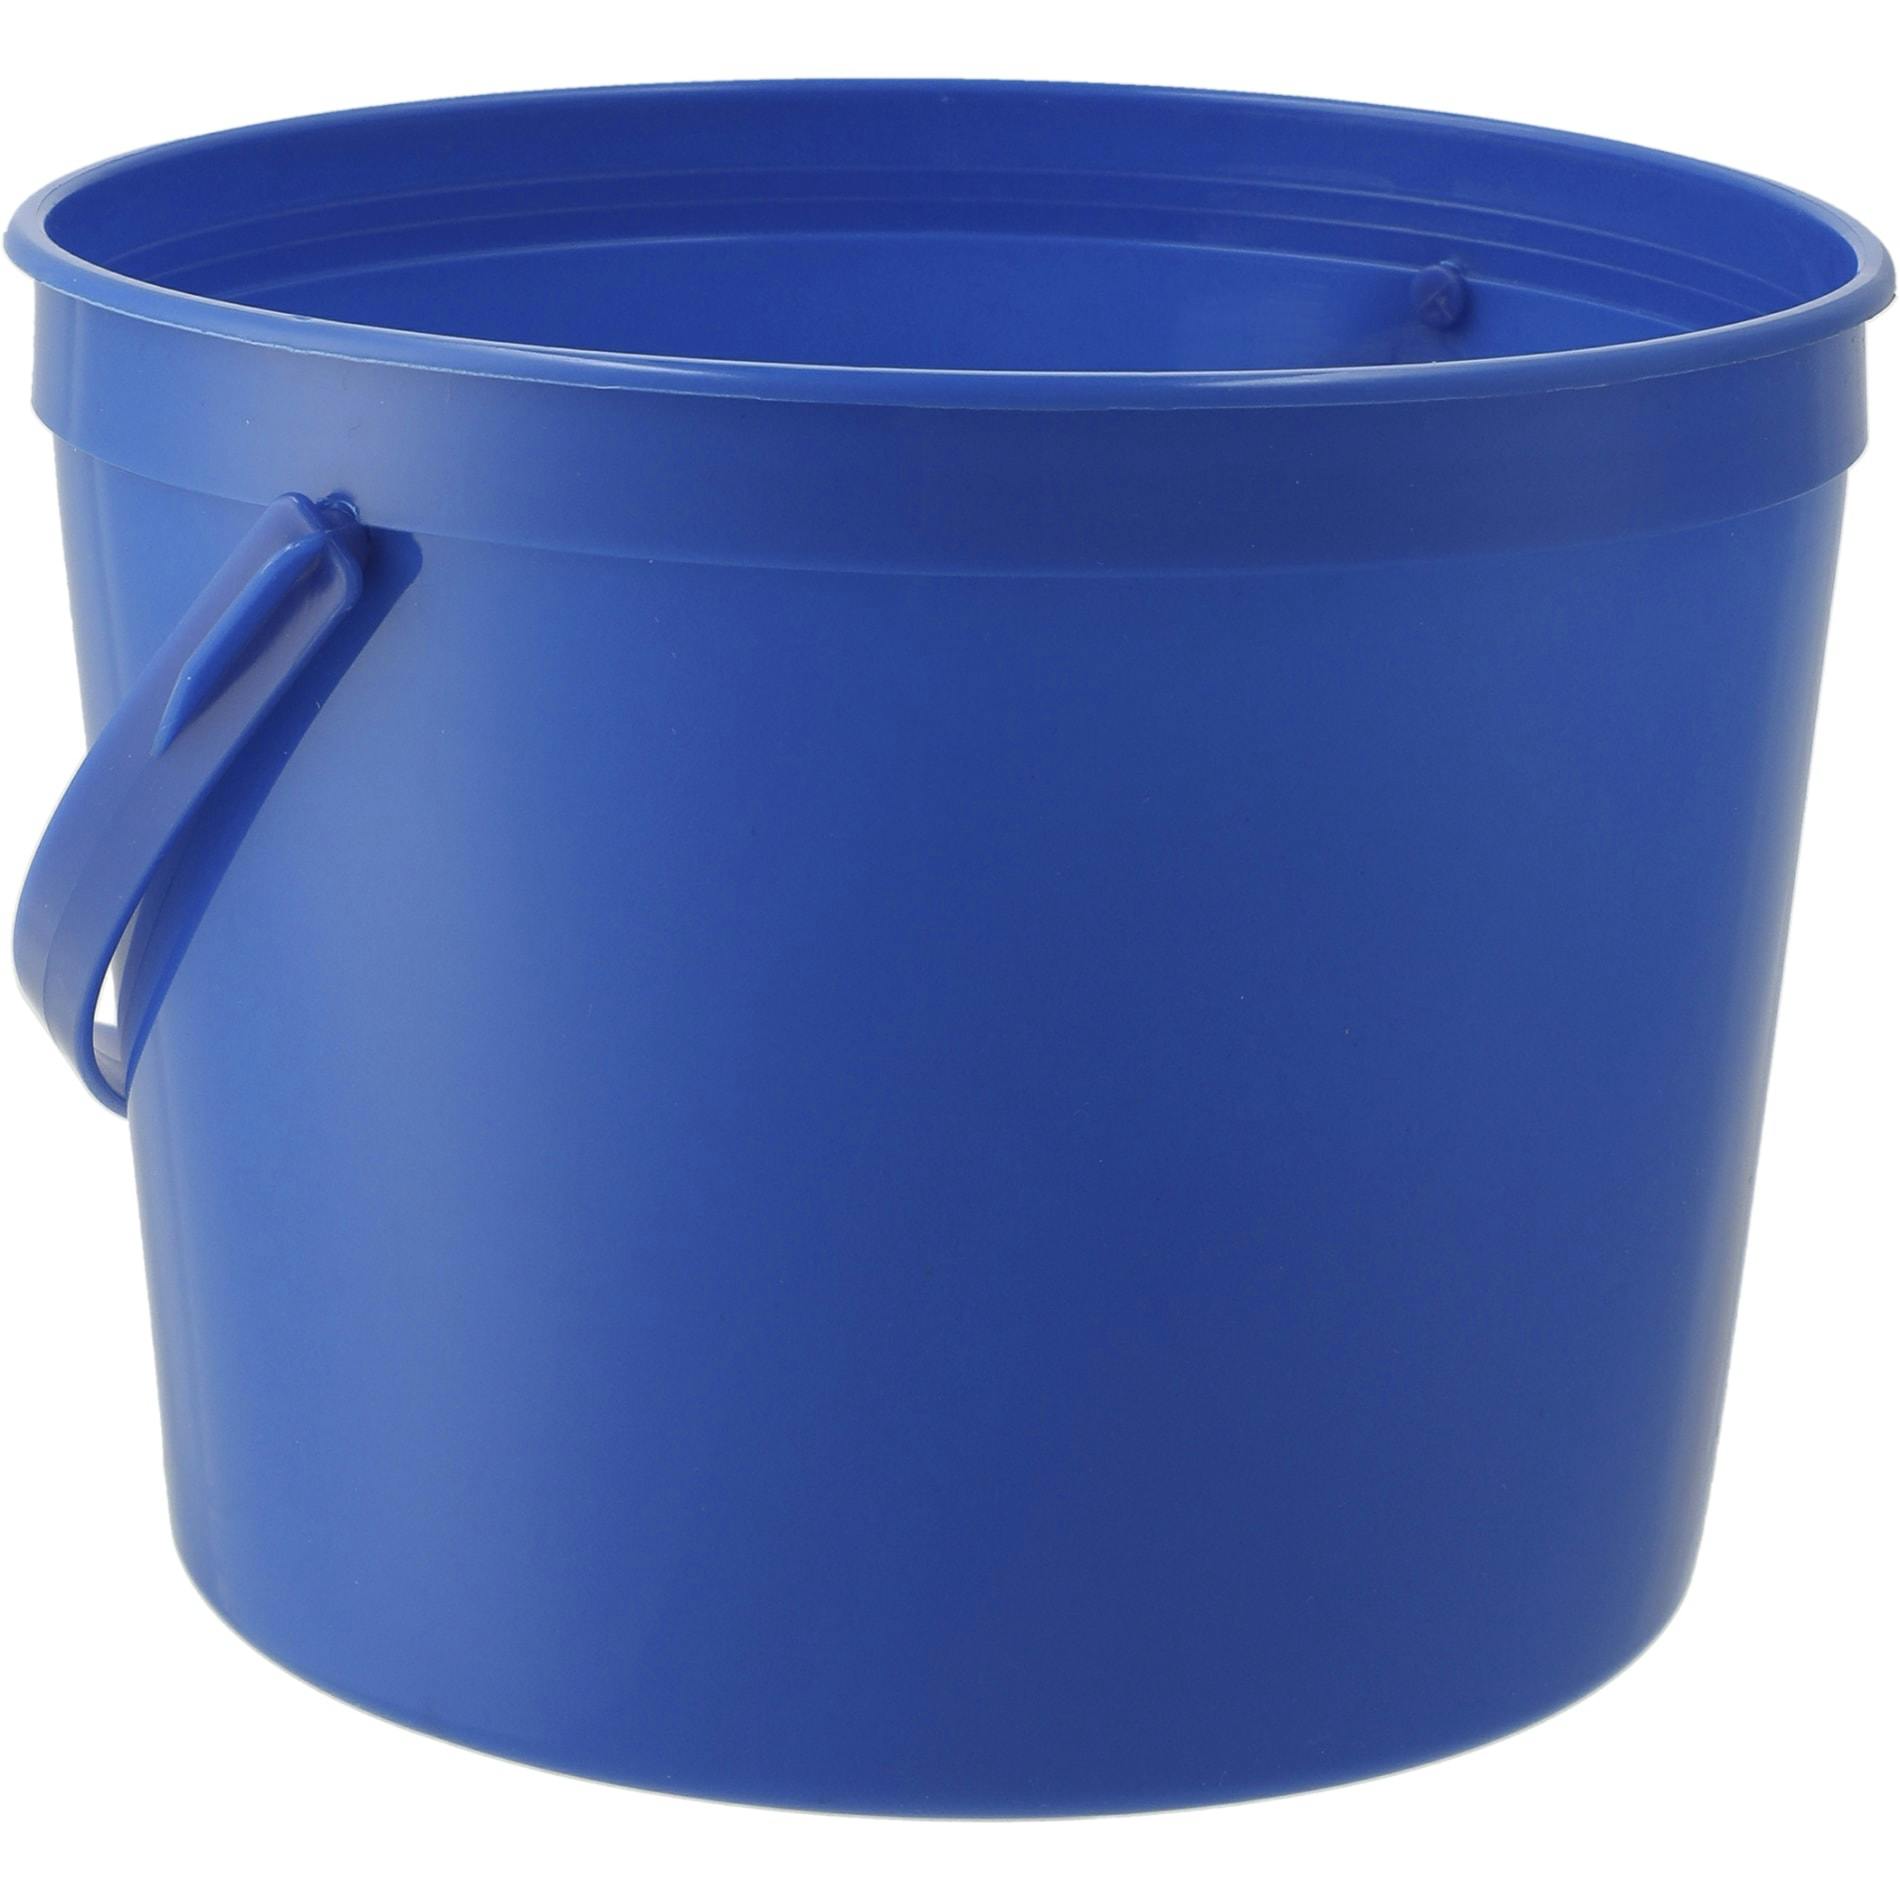 64oz Pail with Handle - additional Image 1